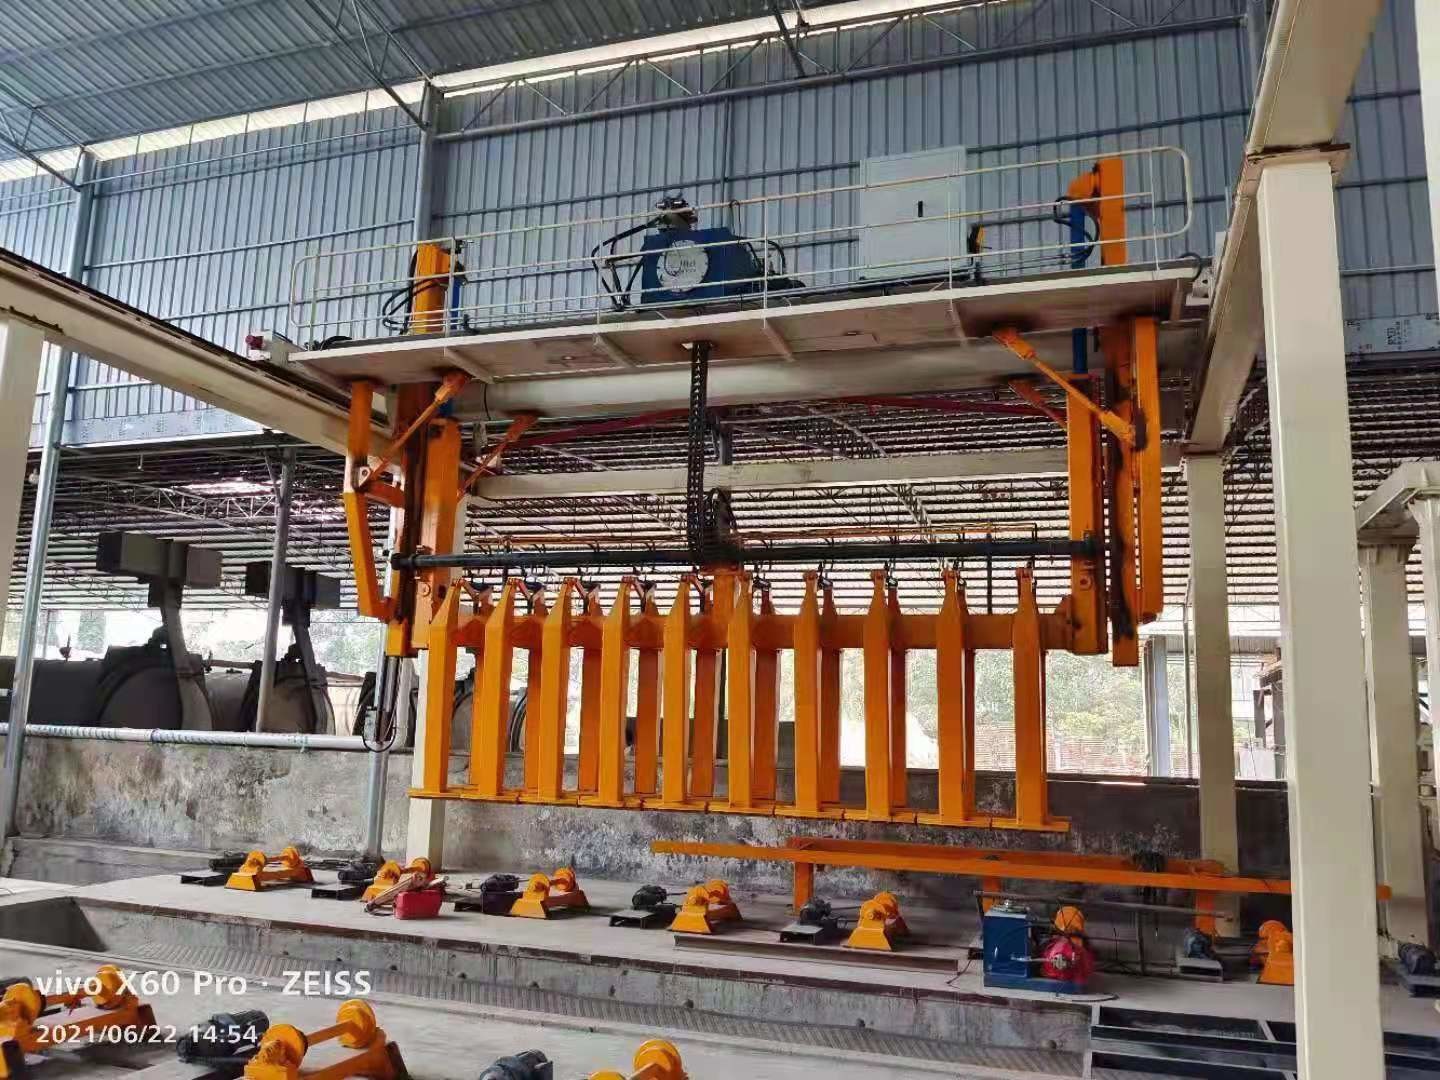 Quality W2570mm 380V Hoist AAC Block Making Machine For Finished Concrete for sale